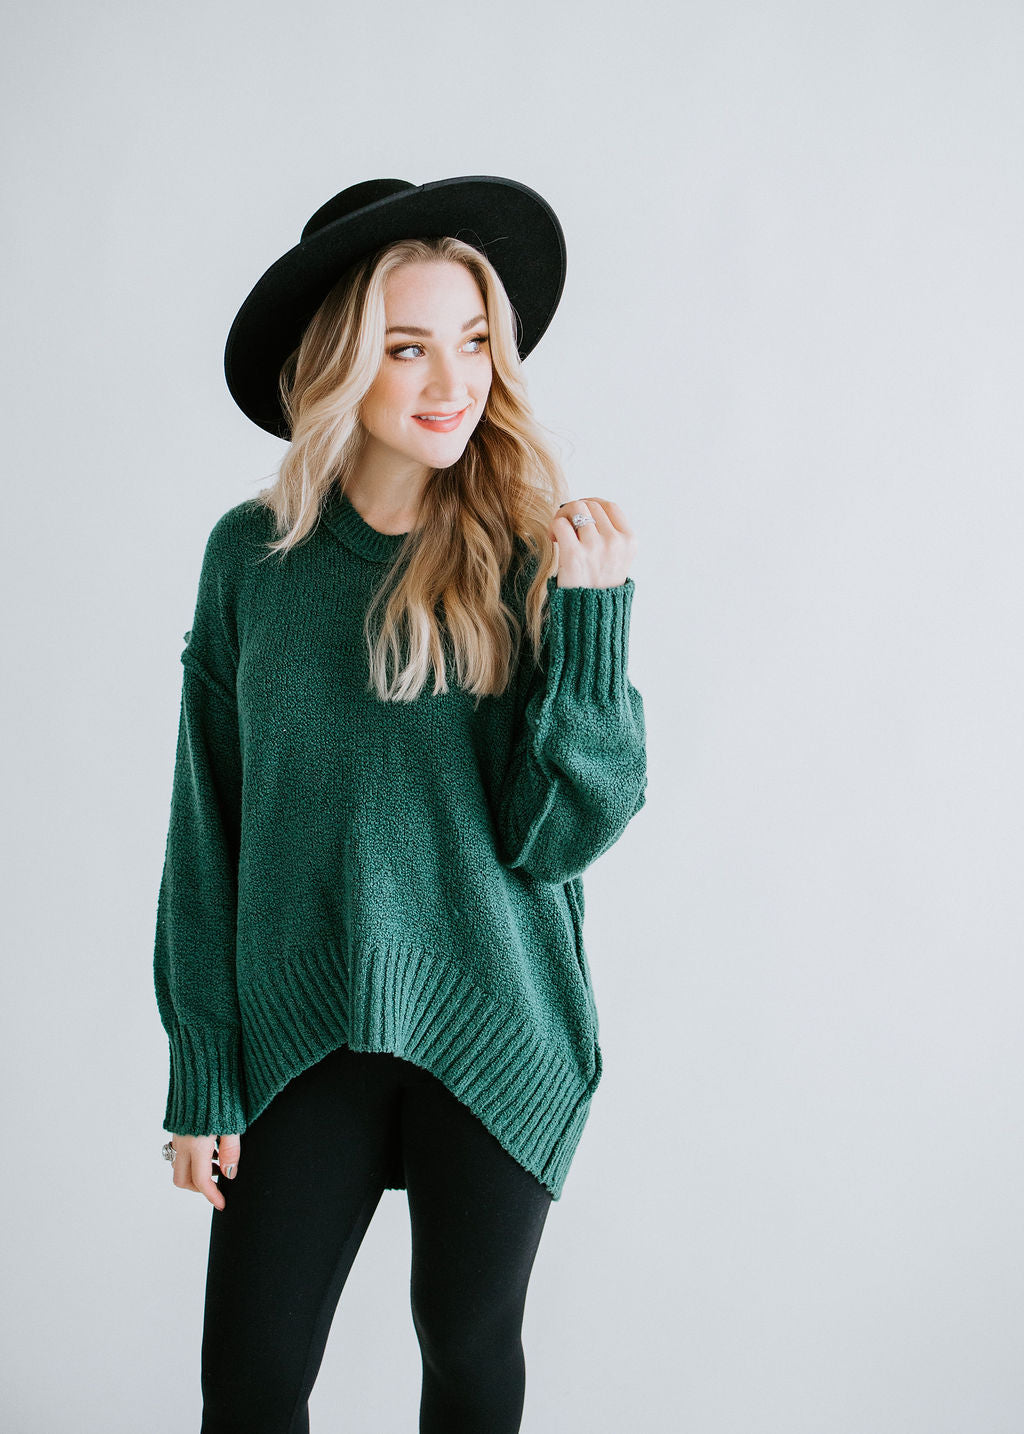 image of Rae Chunky Sweater by Chelsea DeBoer